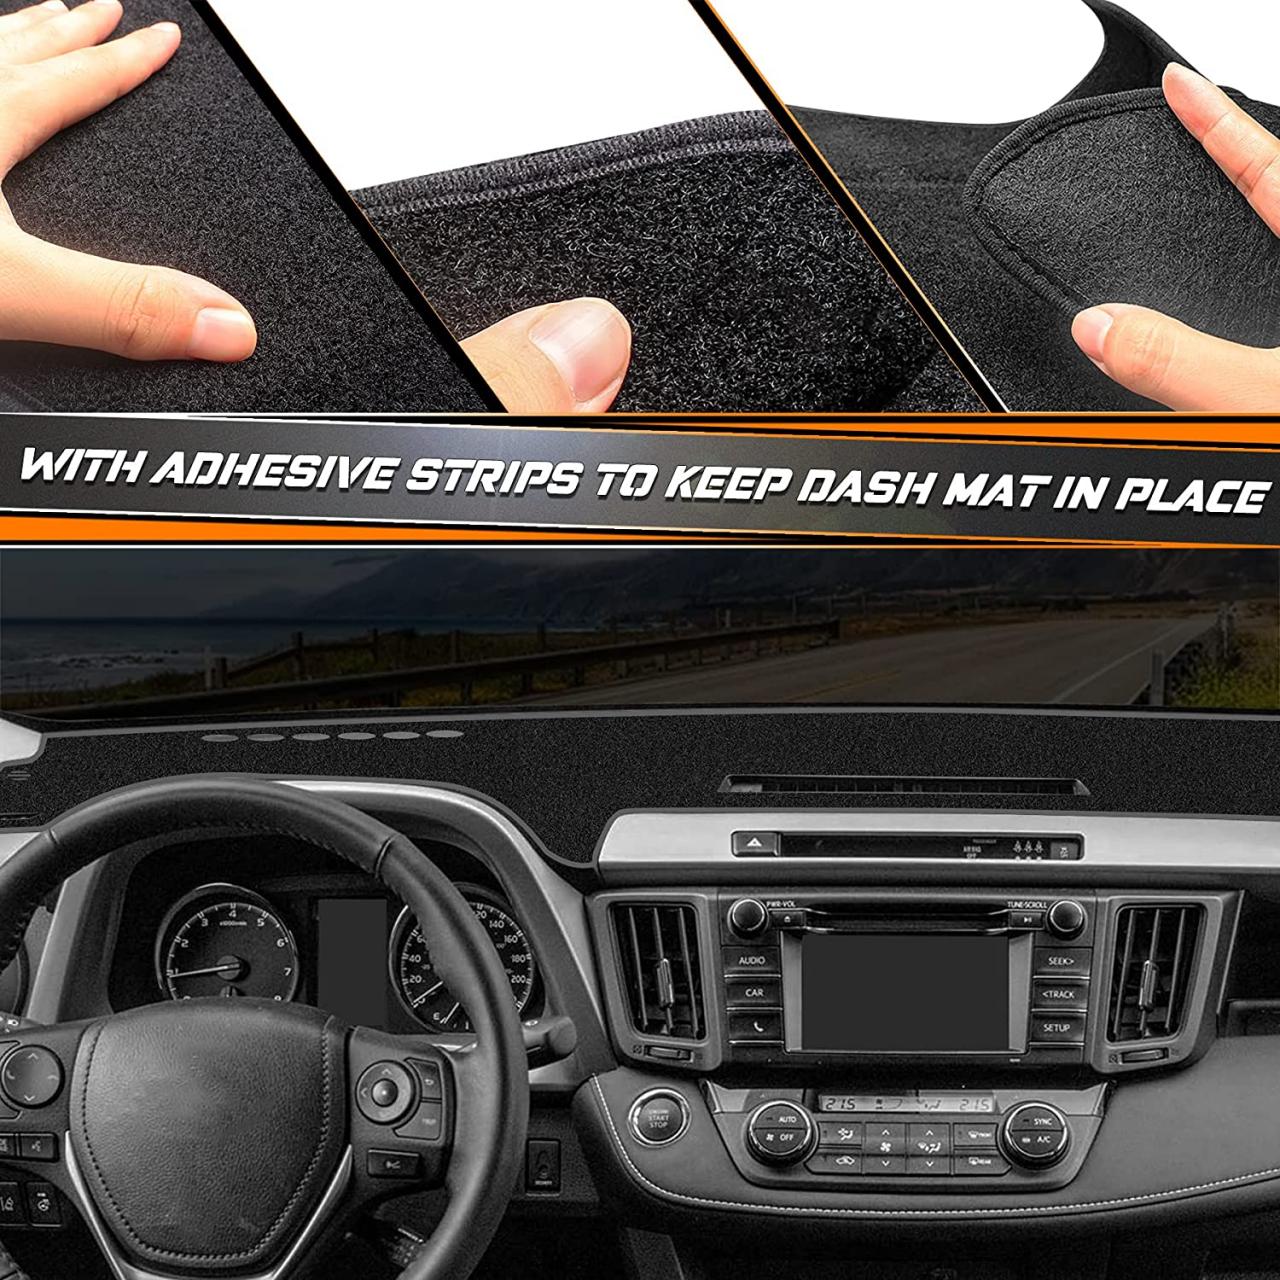 Buy NDRUSH Dash Cover Custom Fit Dashboard Mat Compatible with Toyota RAV4  2013 2014 2015 2016 2017 2018 Online in Hungary. B08YYT1F1G